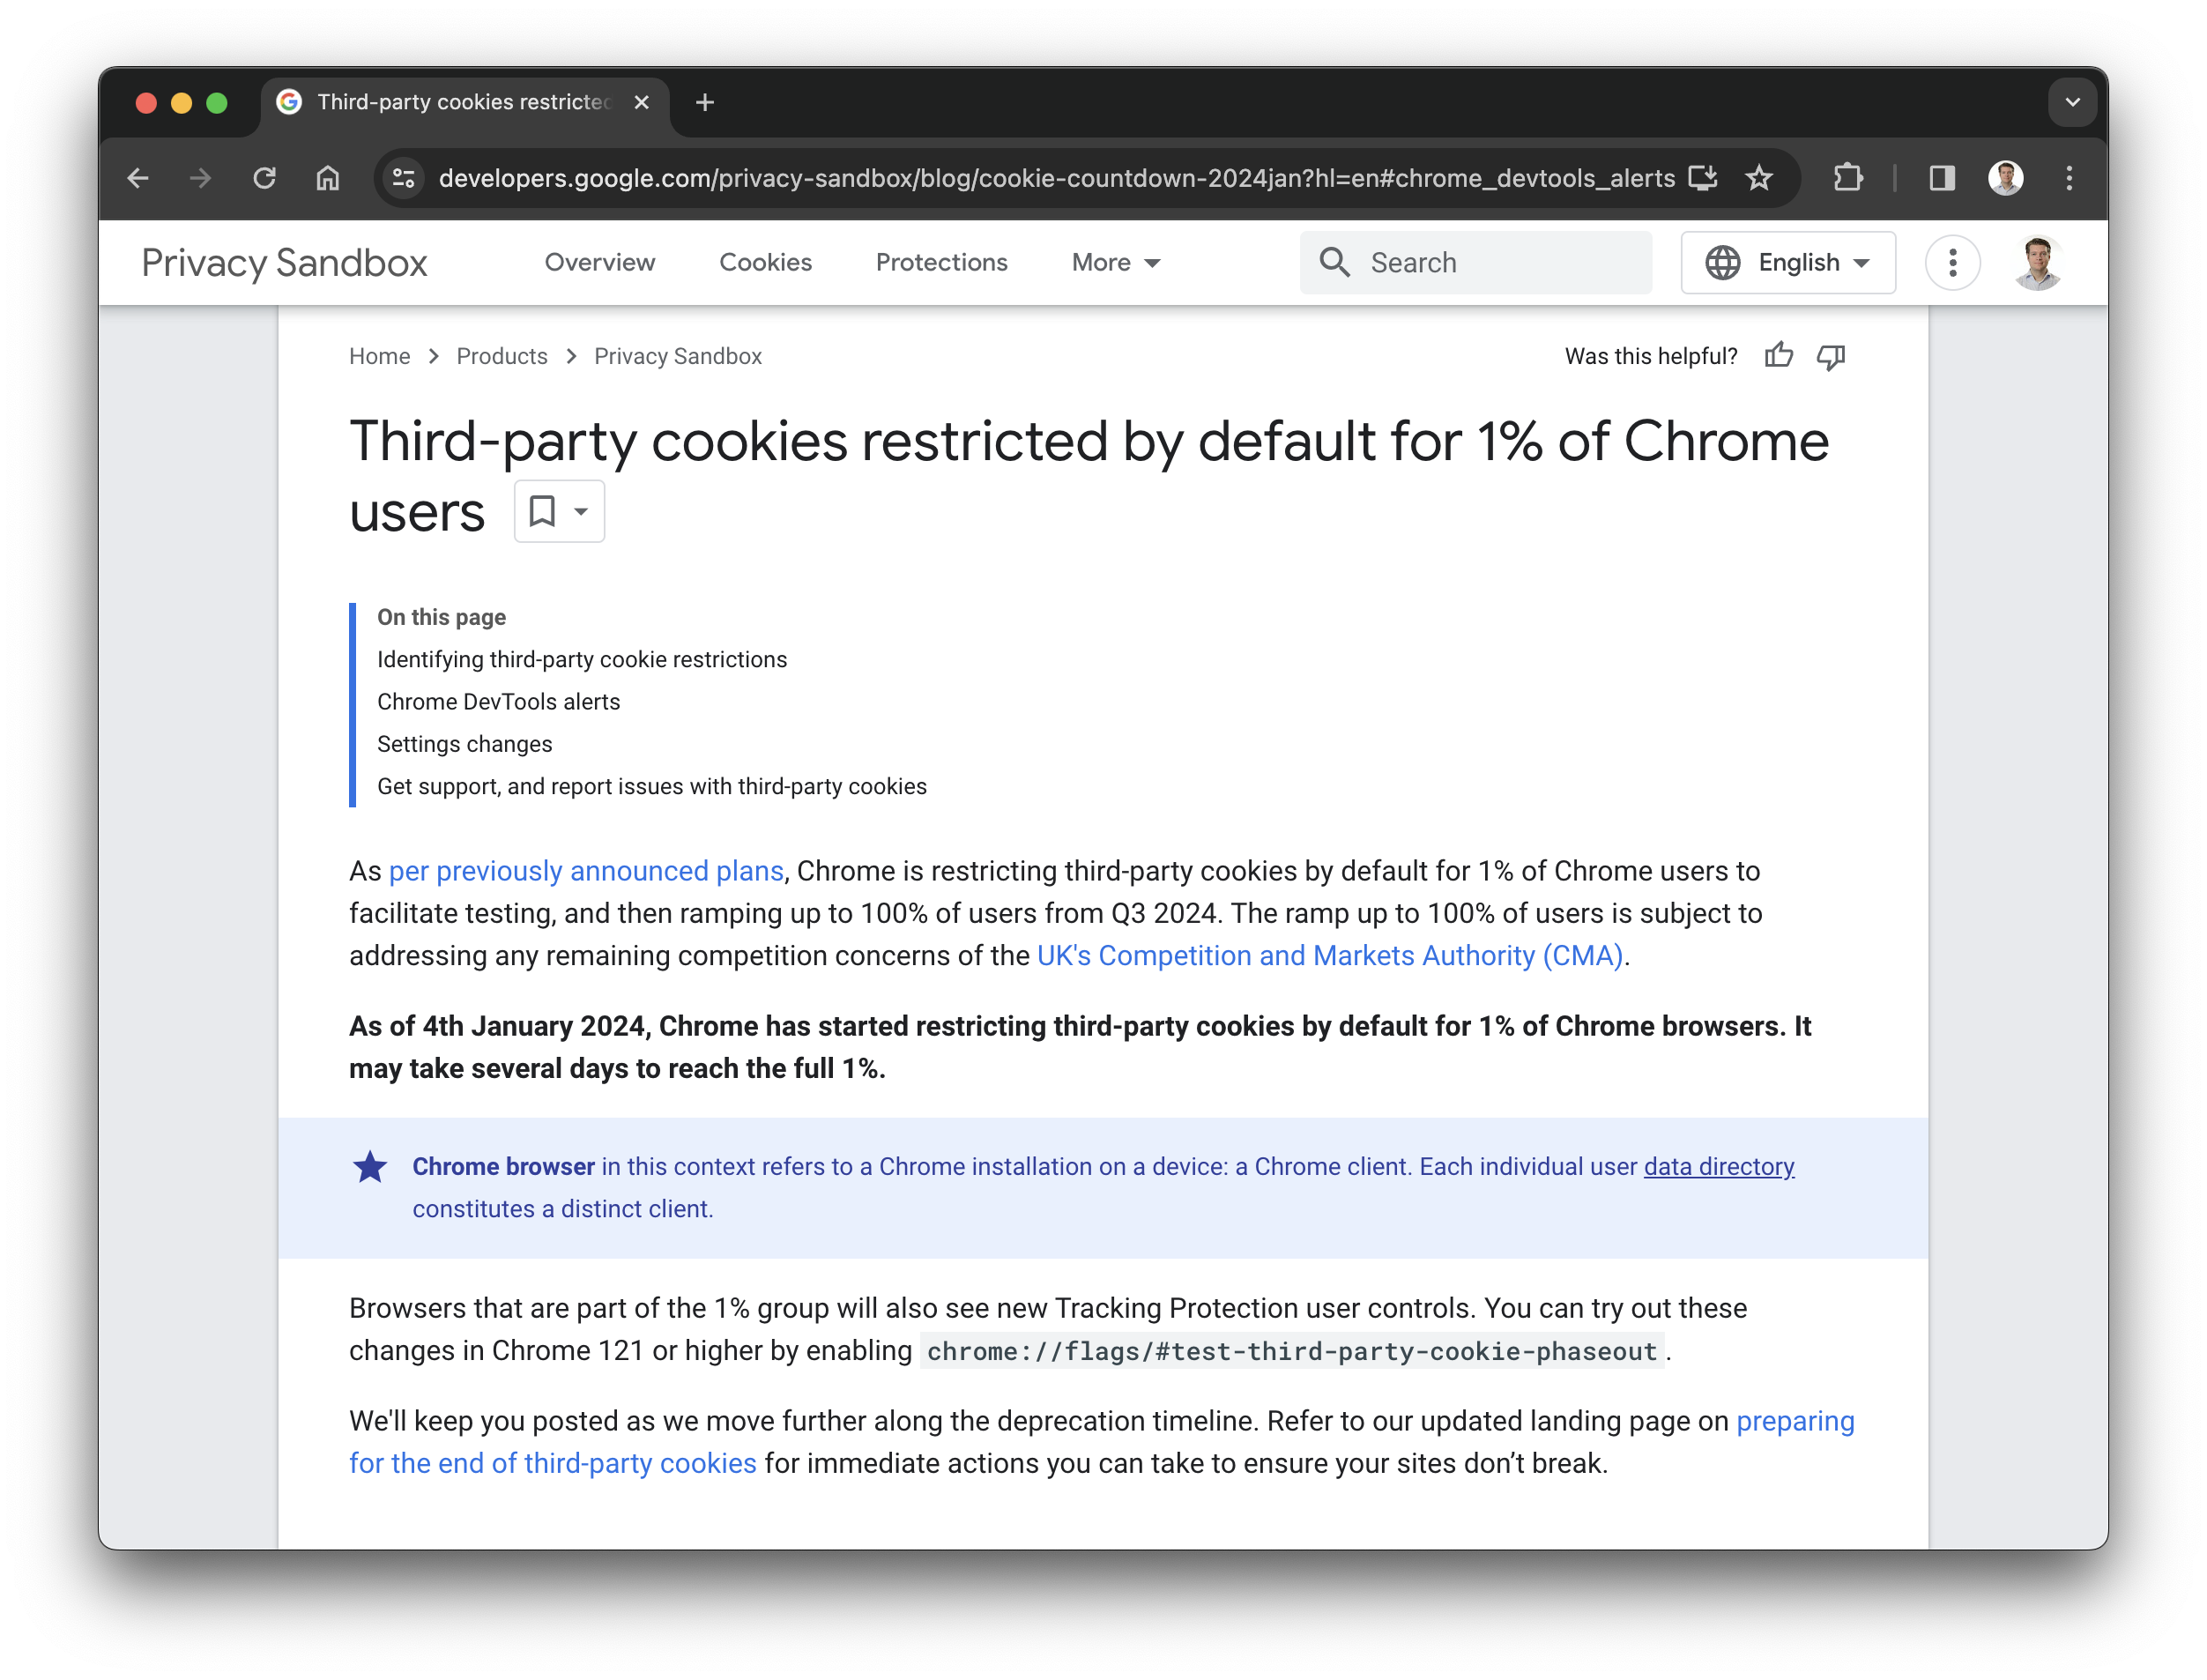 Third-party cookies restricted by default for 1% of Chrome users